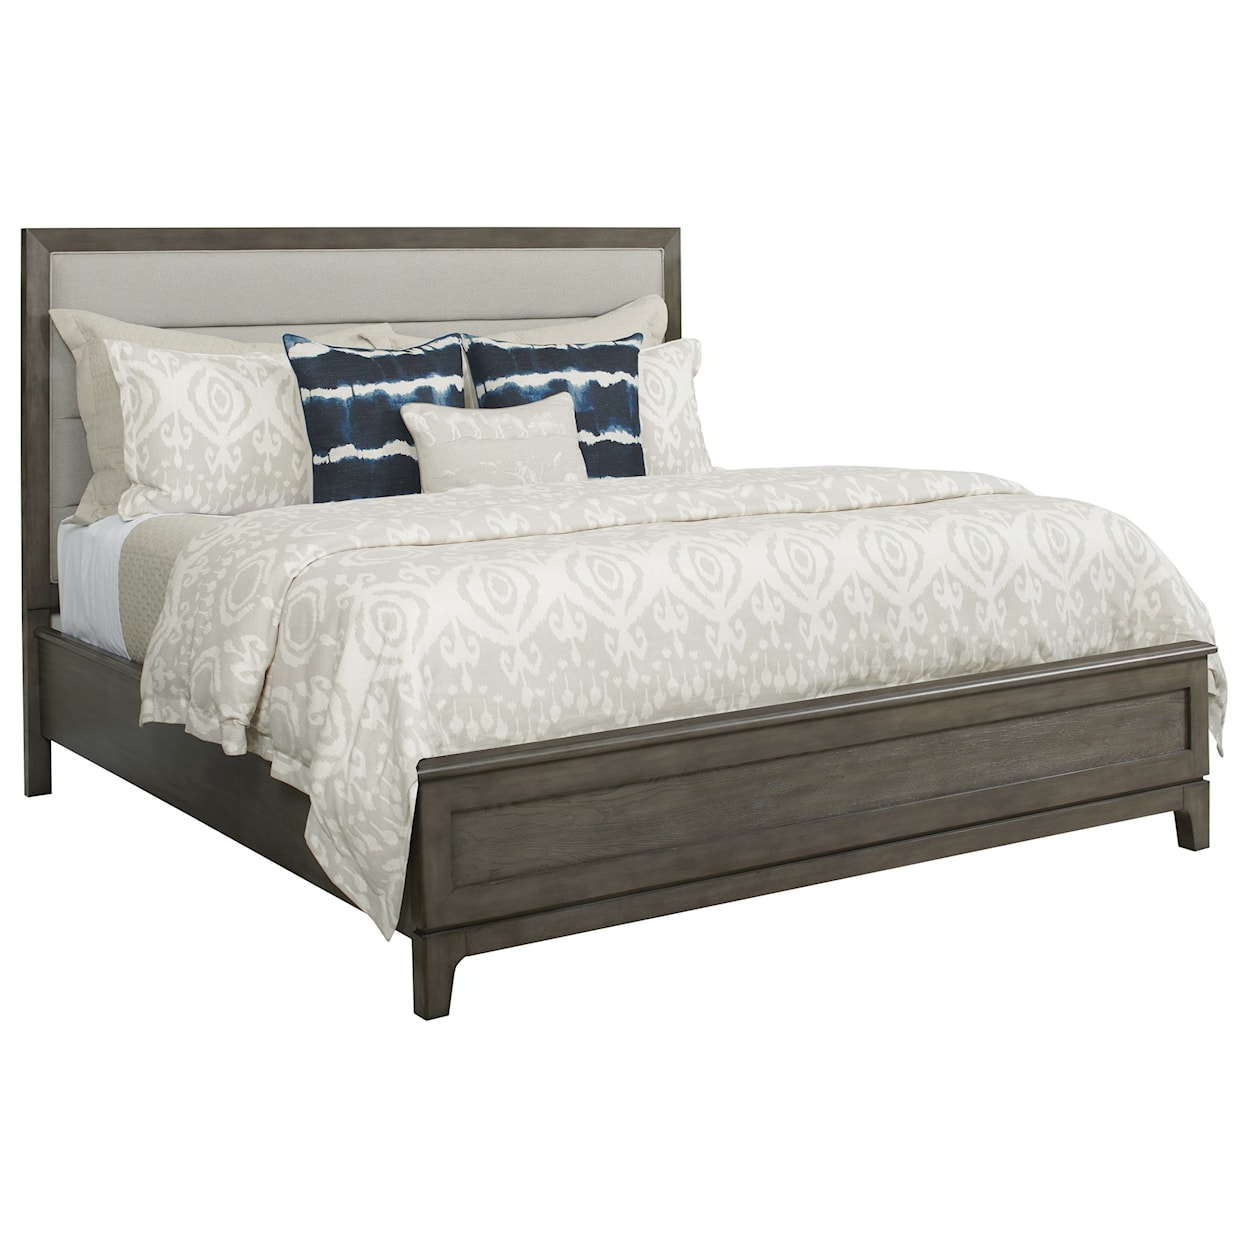 Kincaid Furniture Cascade Ross King Upholstered Panel Bed